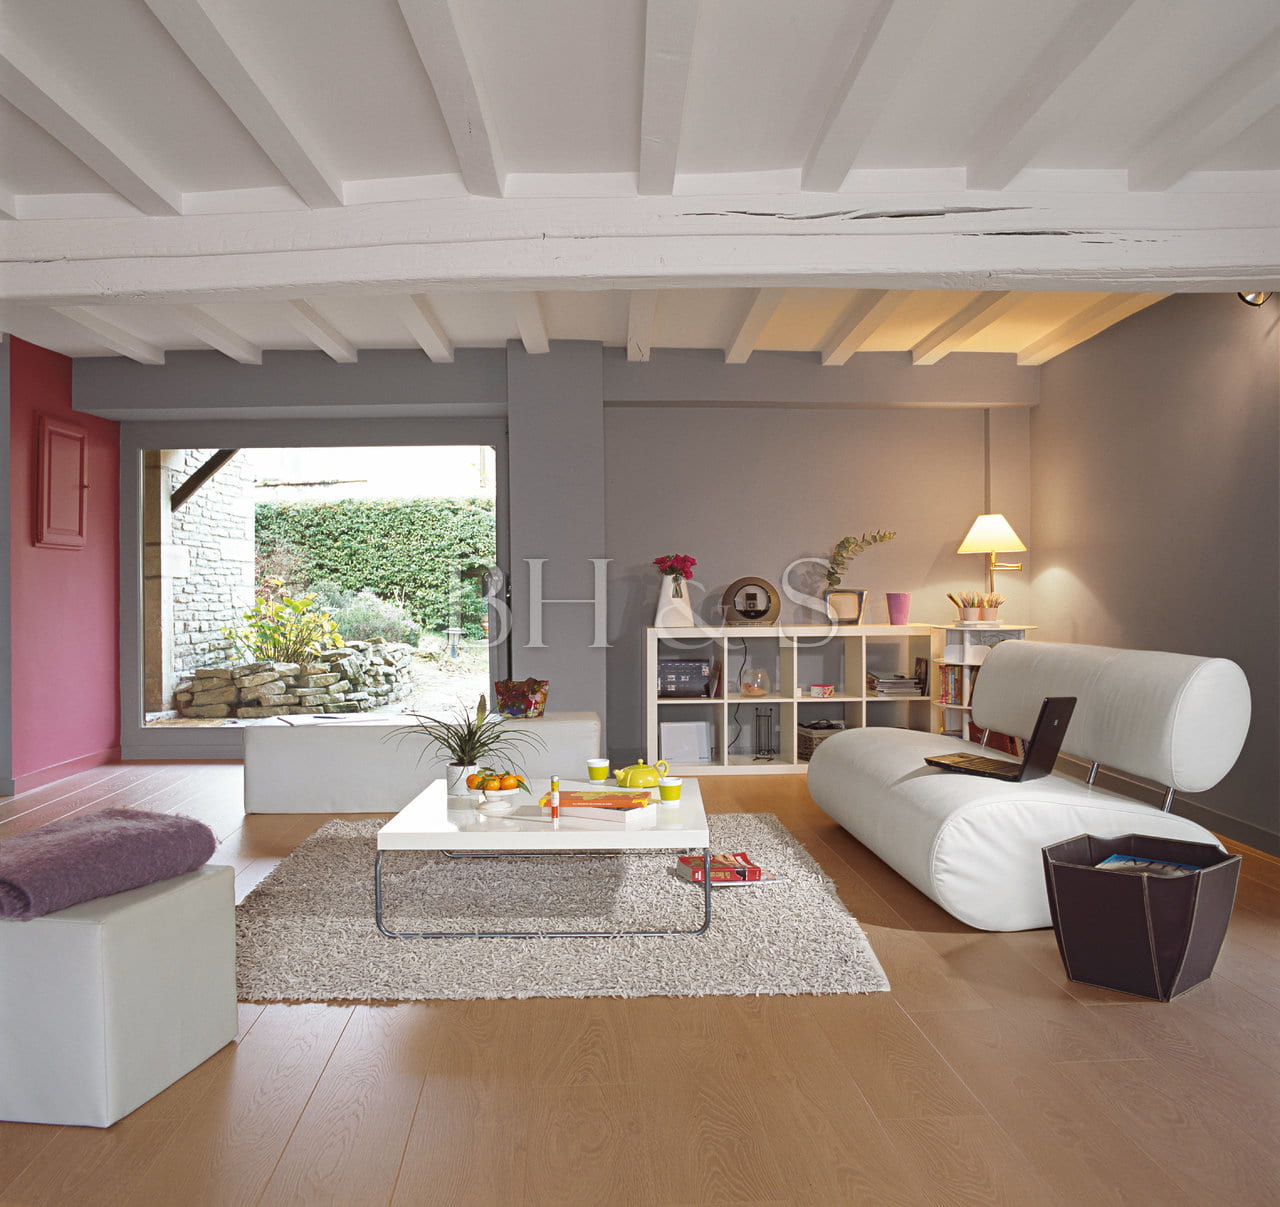 COMPLETE RENOVATION OF A PERIOD HOUSE IN THE WINE AREA IN BURGUNDY